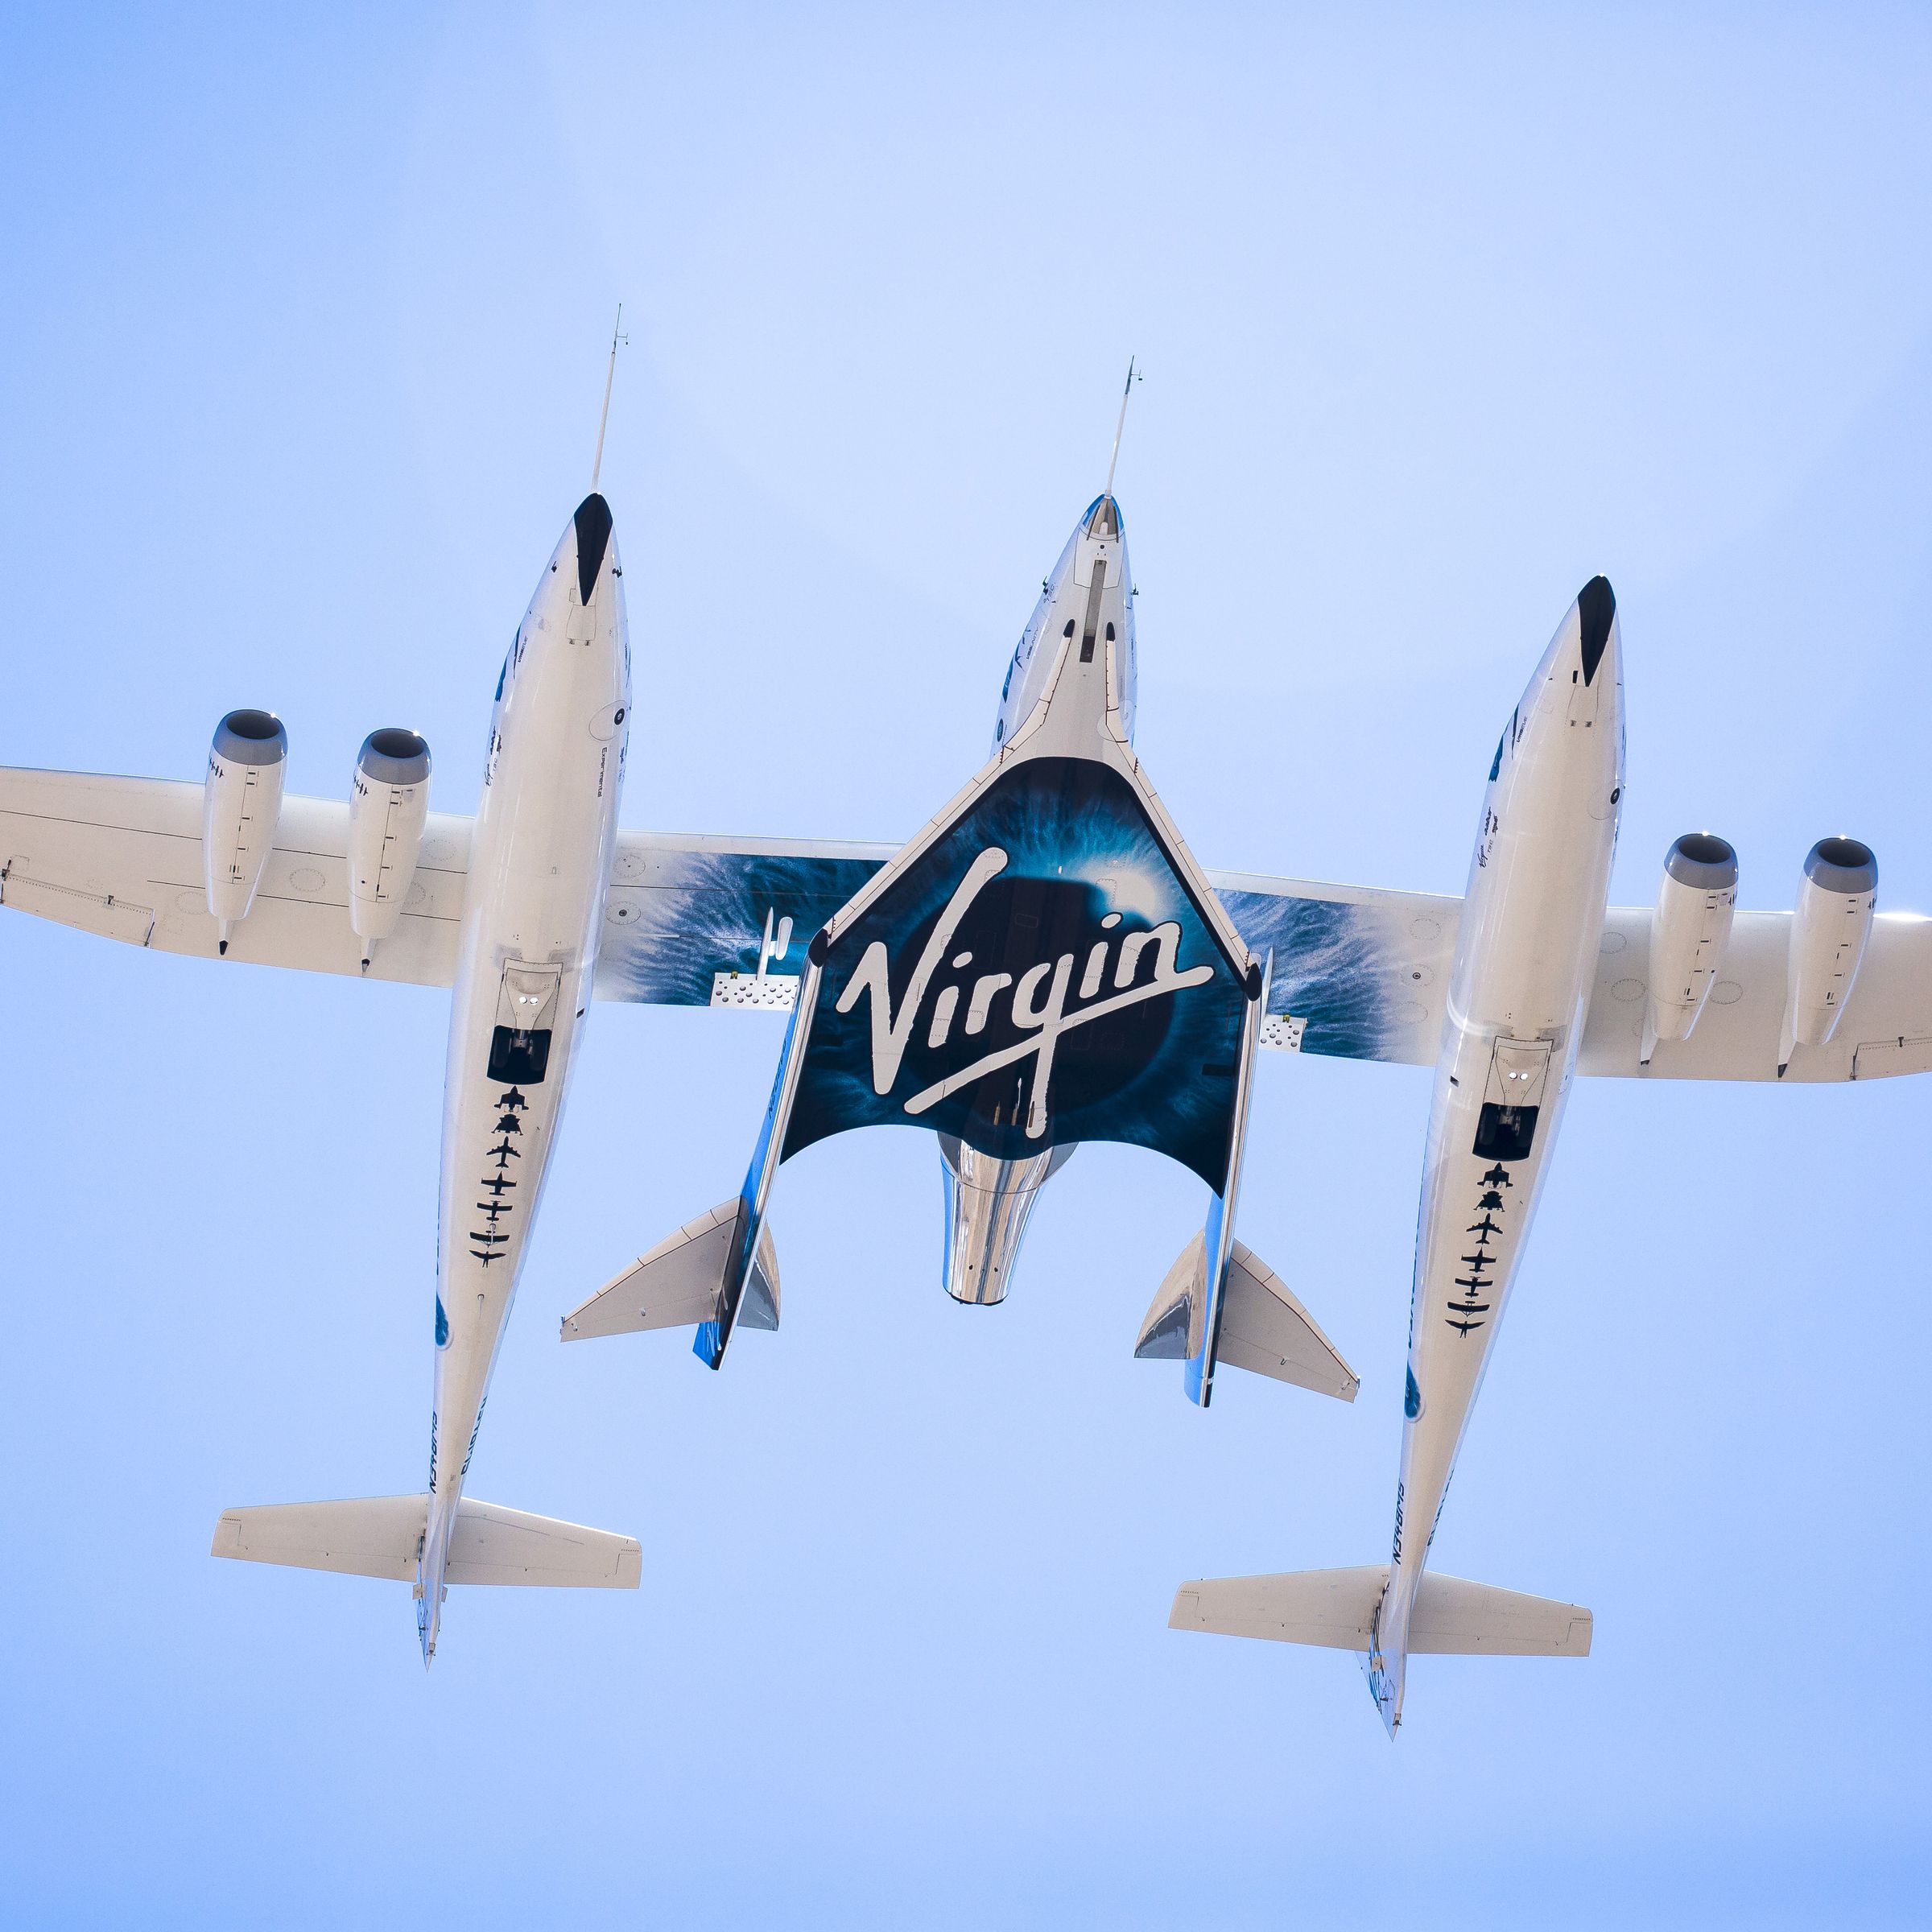 Virgin Galactic’s SpaceShipTwo spaceplane is carried between the two fuselages of its WhiteKnight carrier aircraft during a 2016 test.